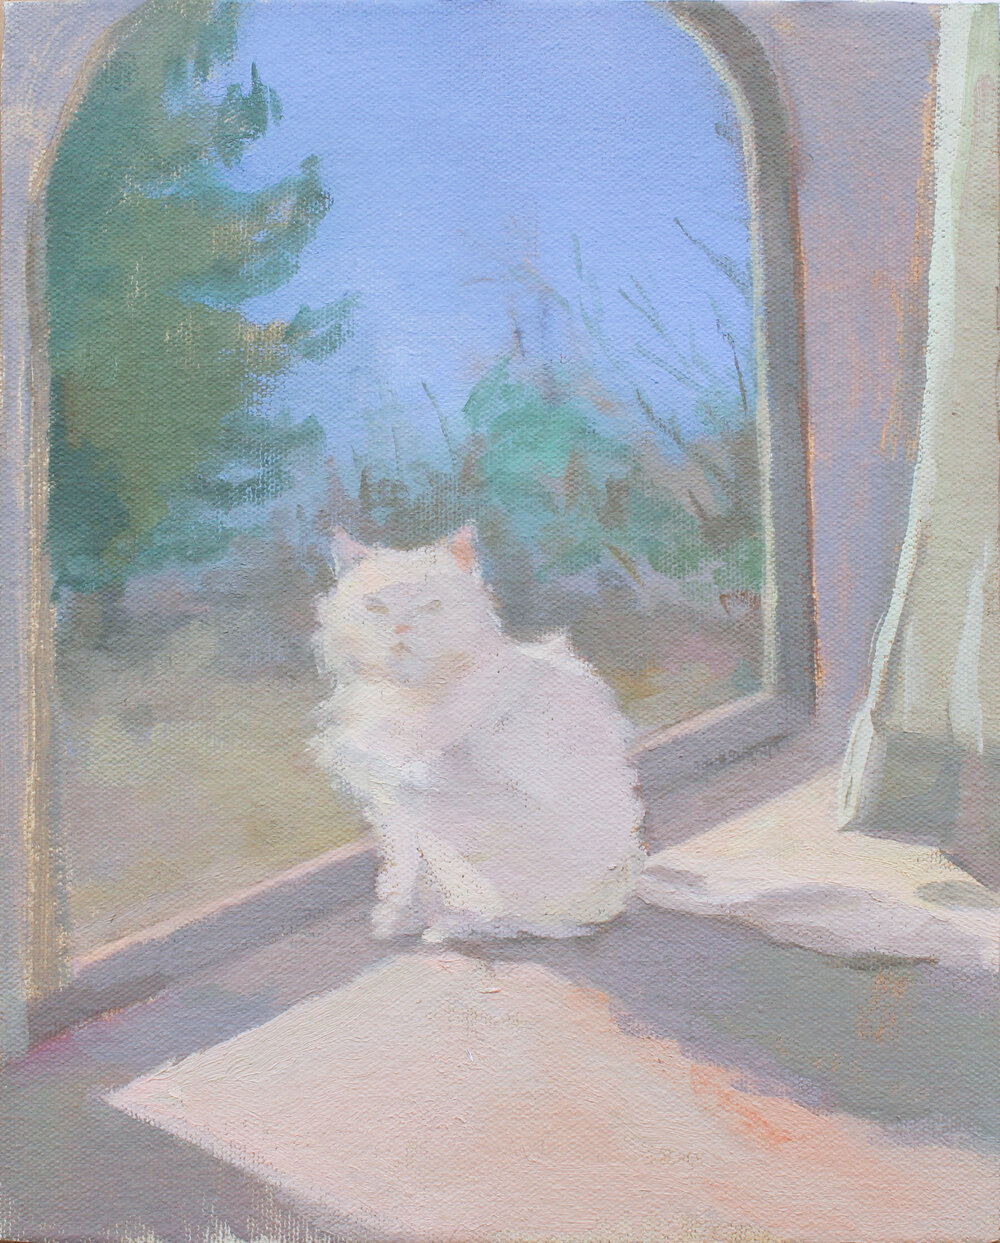    Window with White Cat, Curtain, and Pines   oil on canvas 10 x 8”  private collection Kansas 